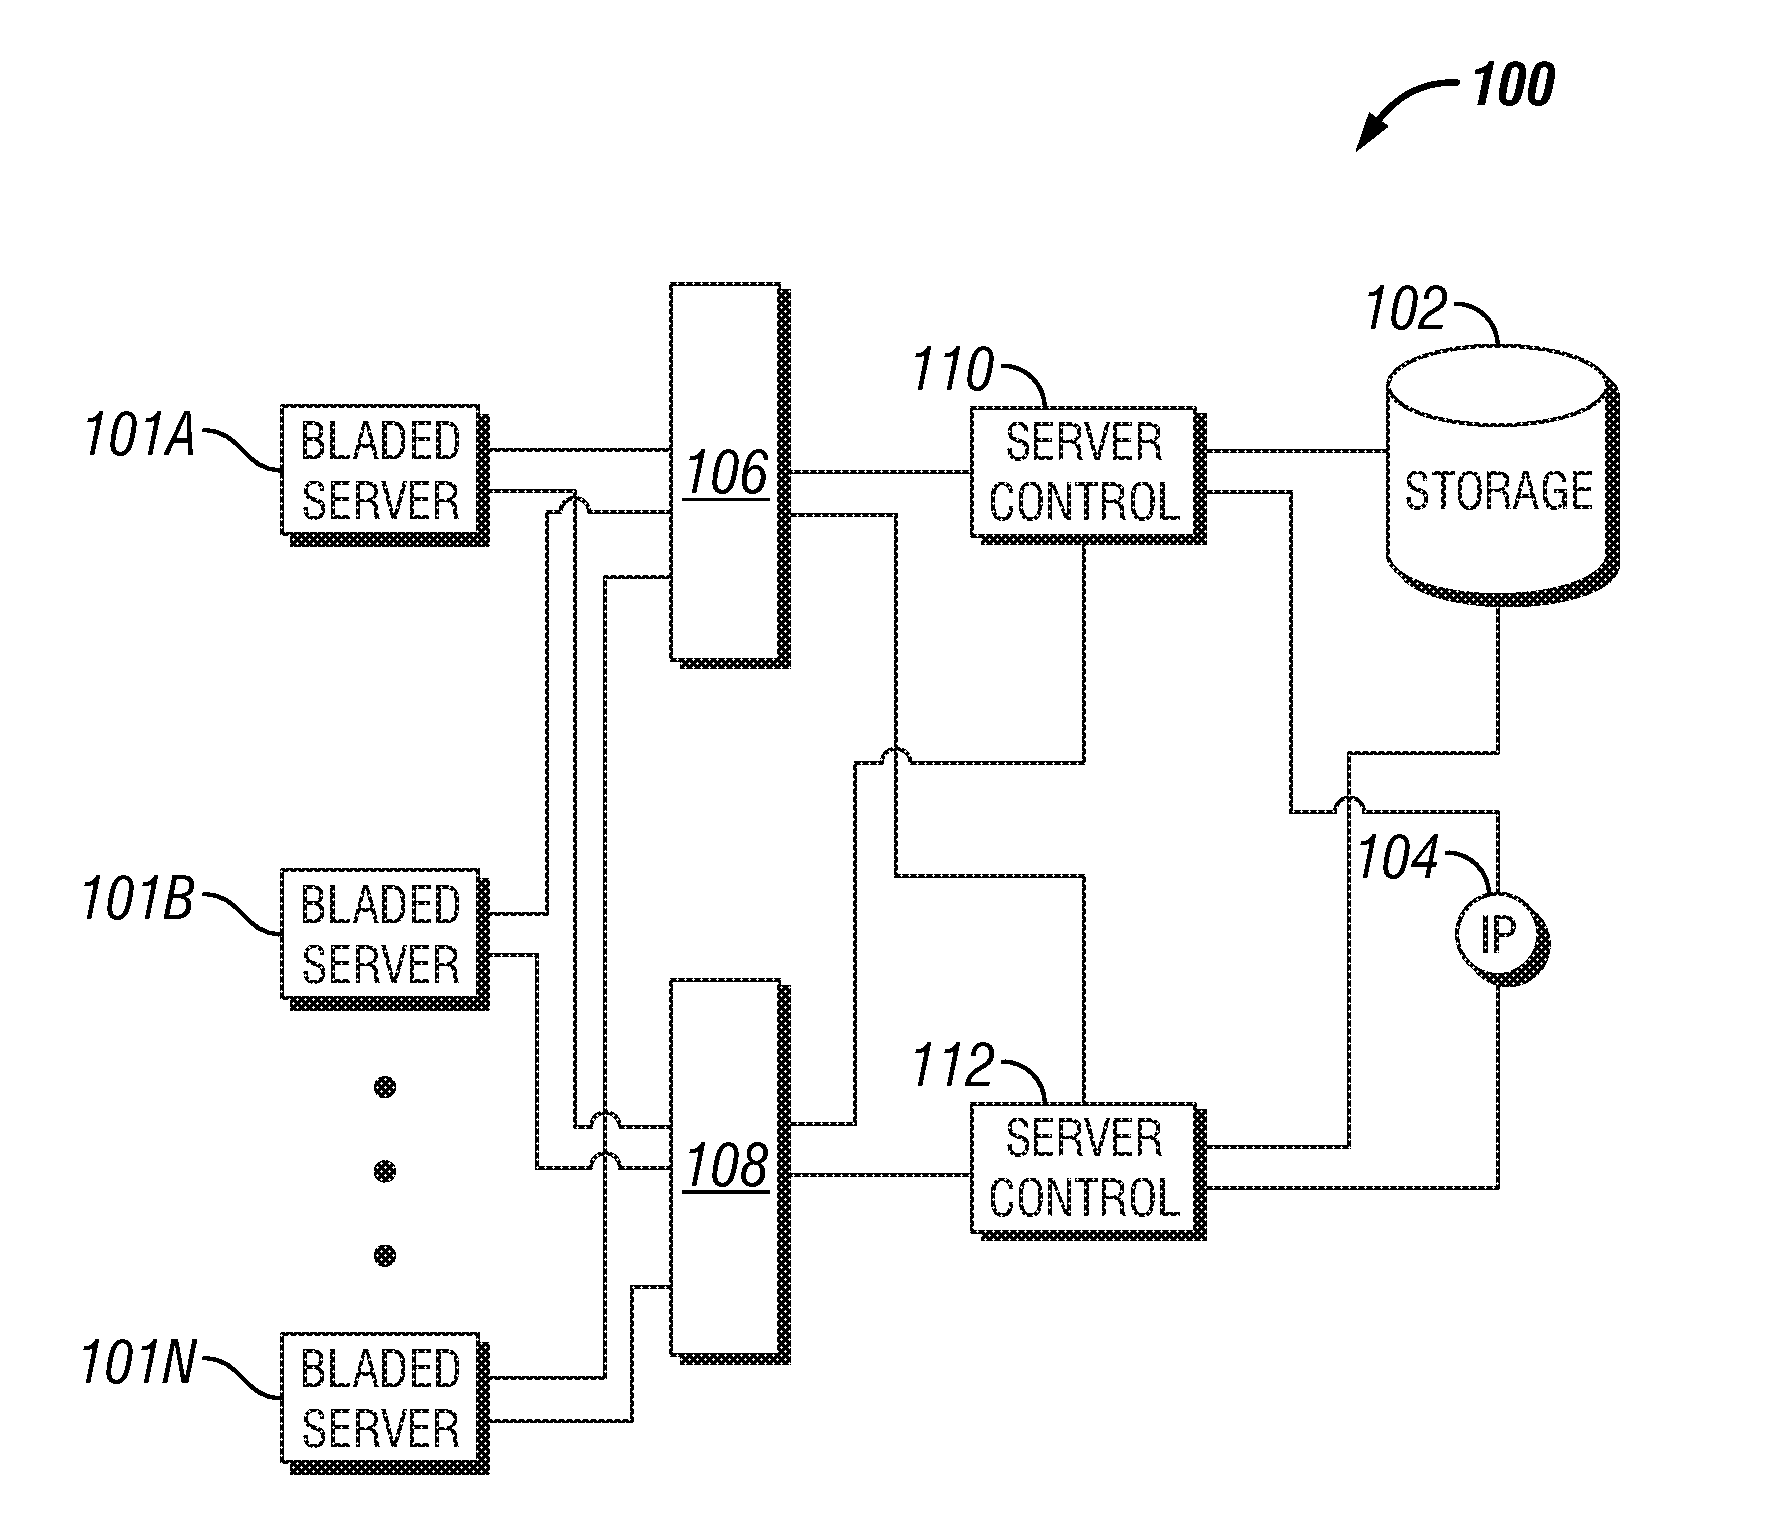 System and method for software failover on a bladed system